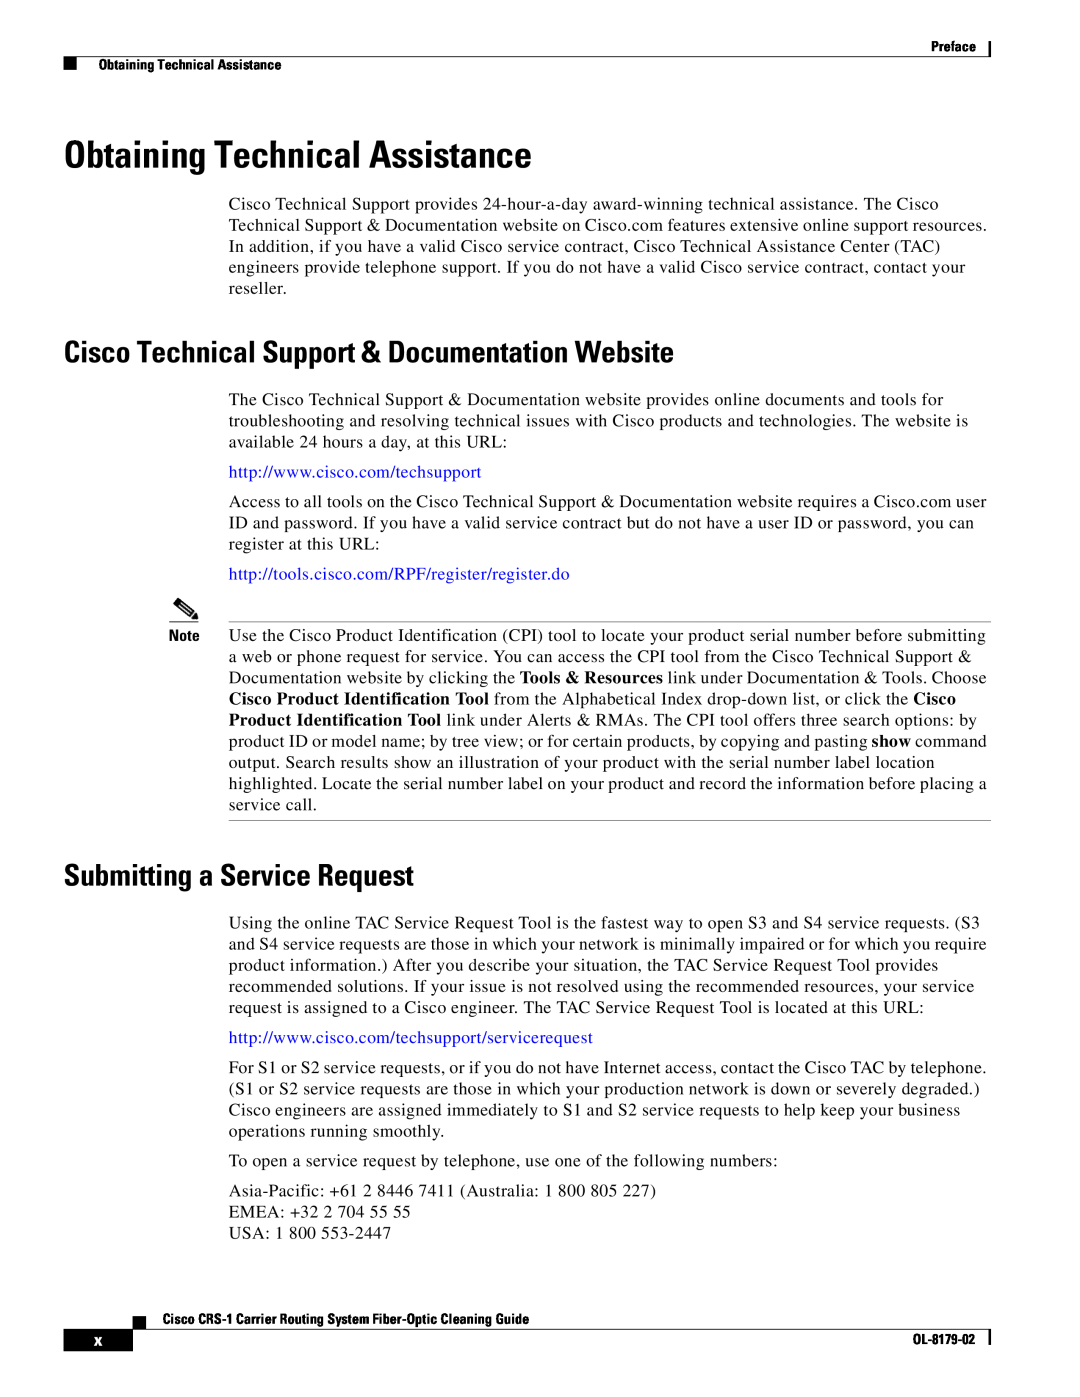 Cisco Systems CRS-1 manual Obtaining Technical Assistance, Cisco Technical Support & Documentation Website 